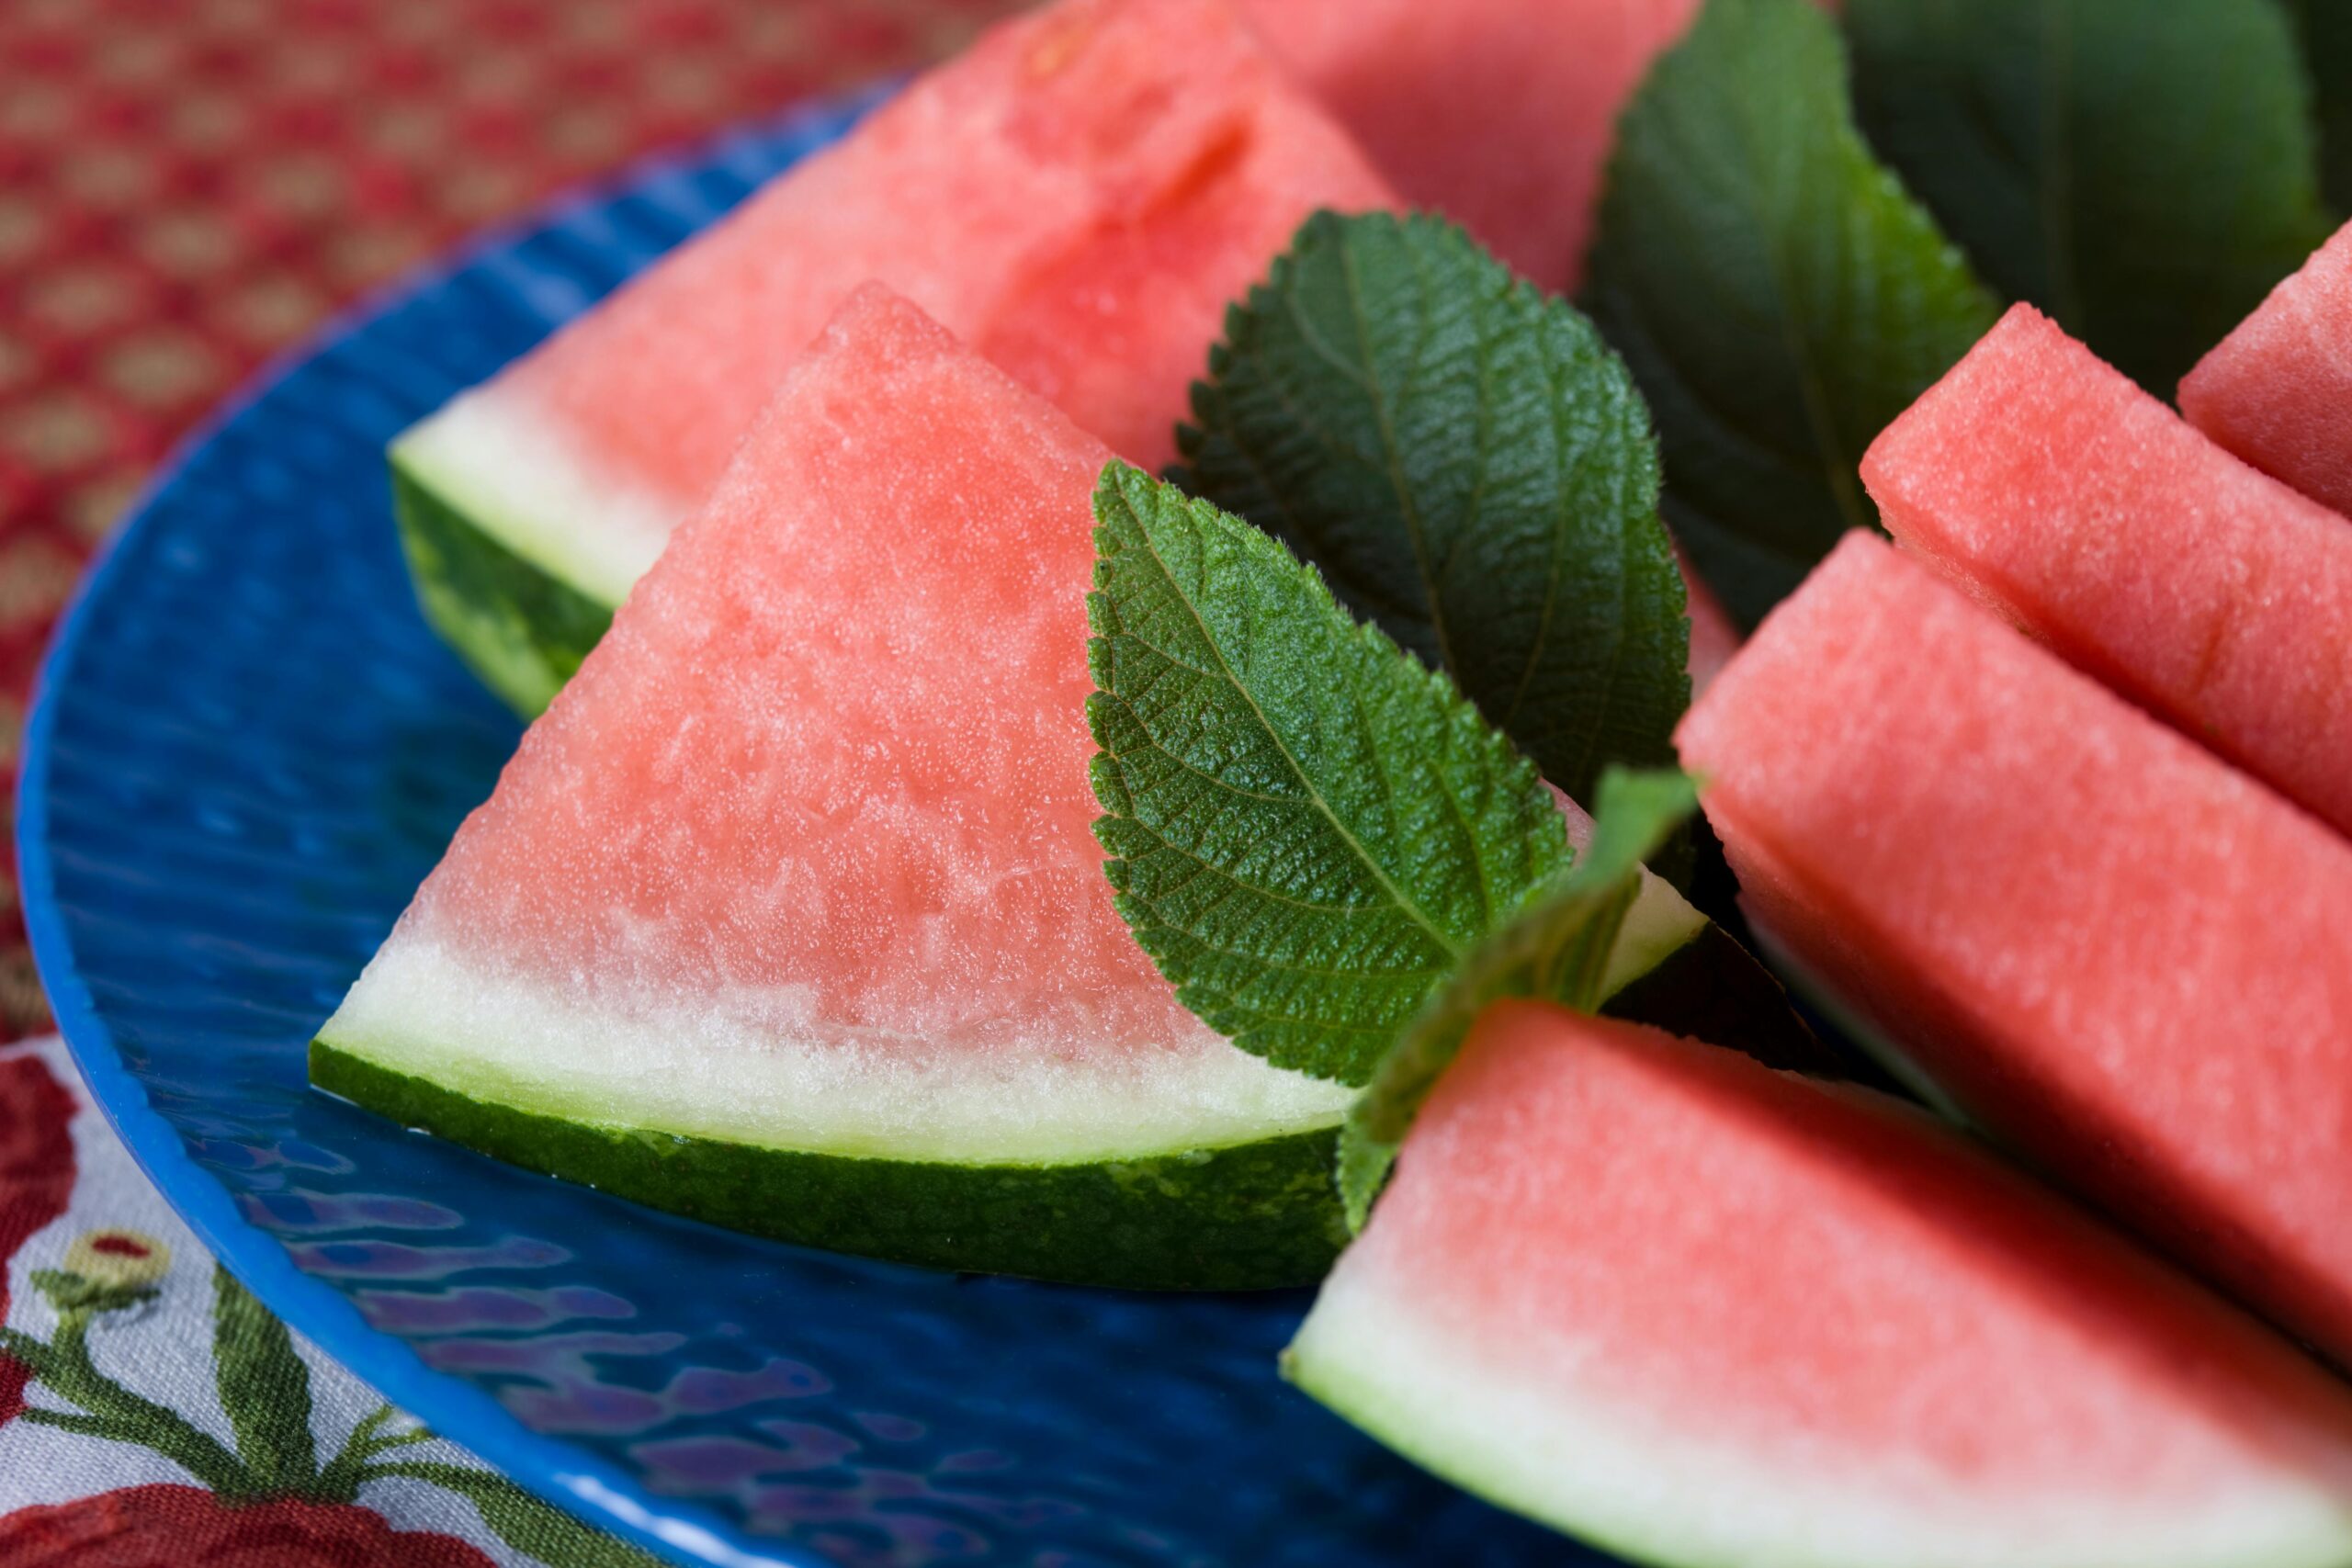 Plate of sliced watermelon.